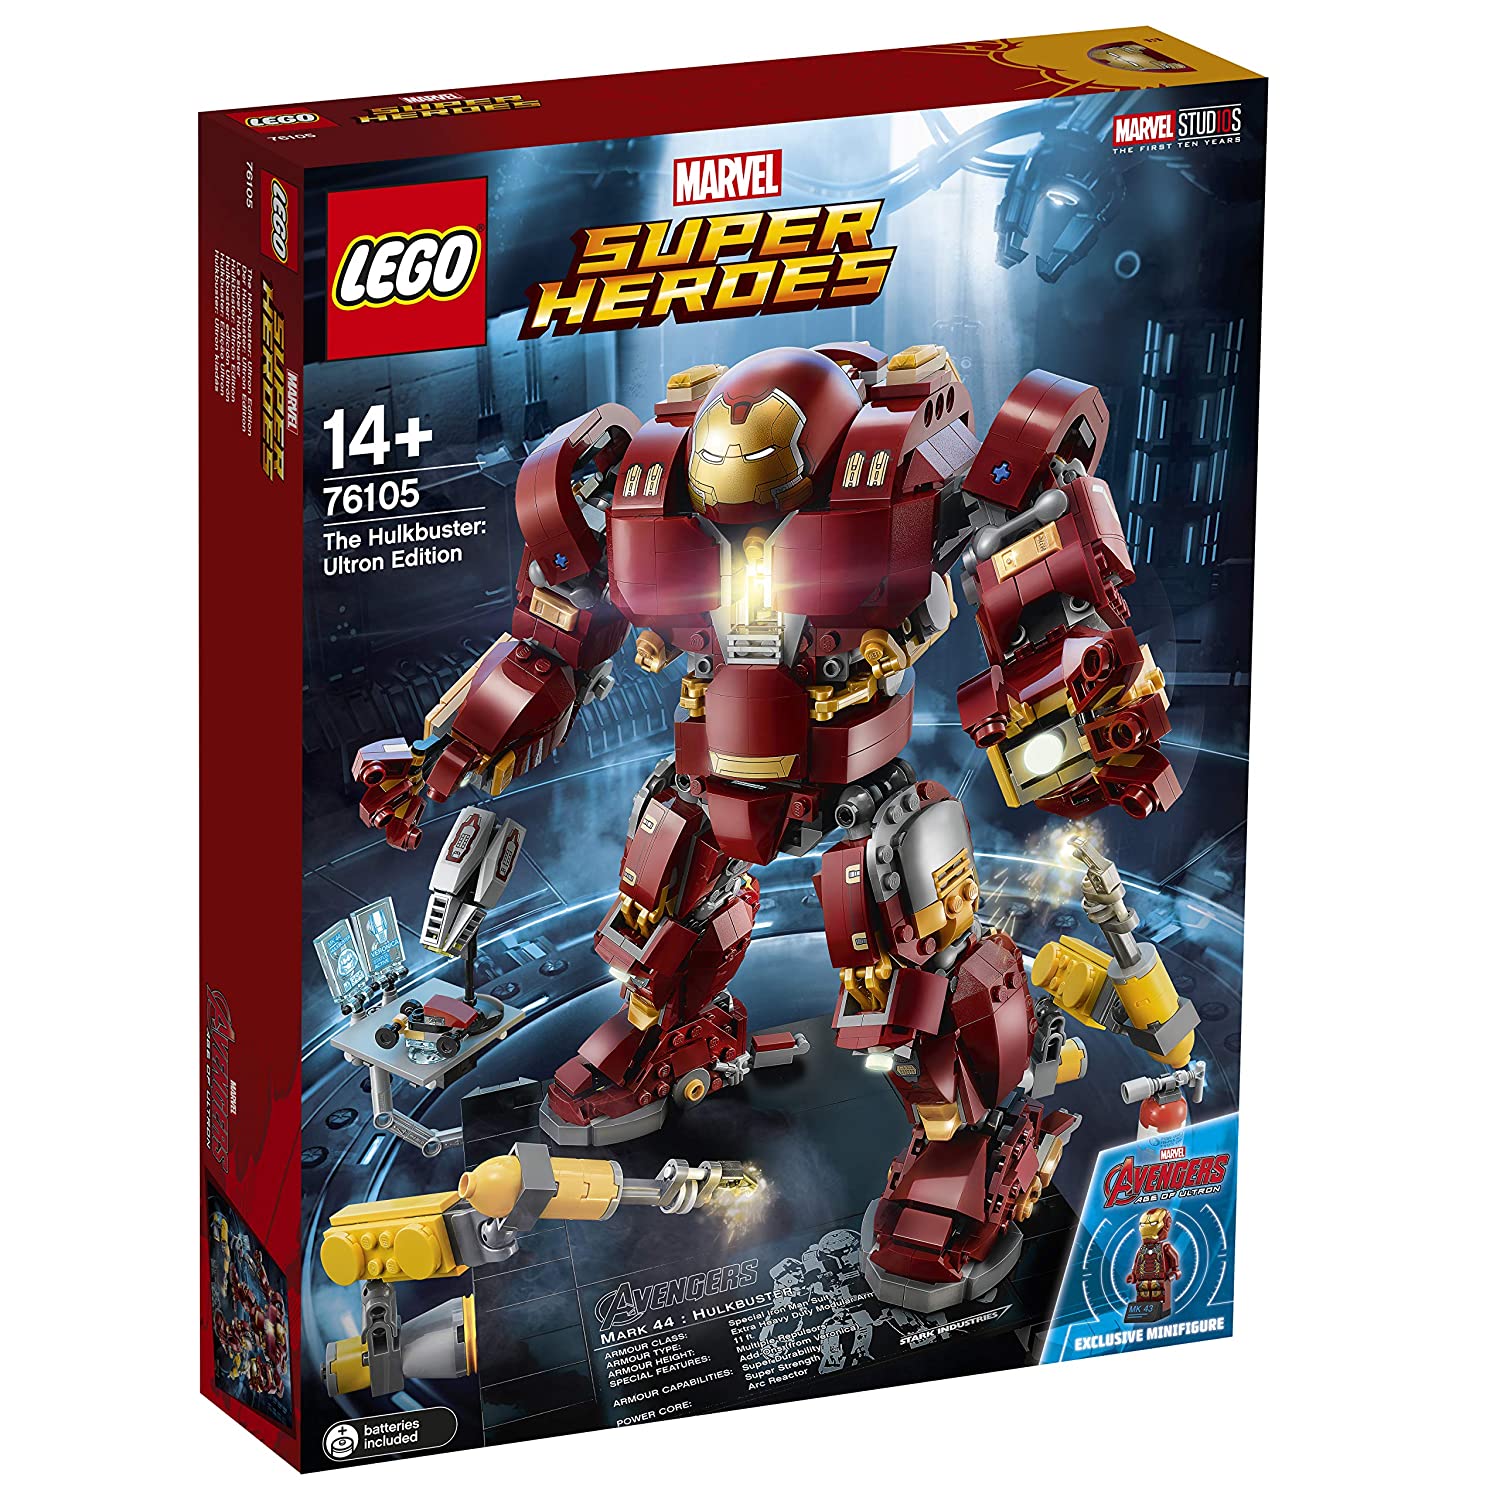 Top 9 Best LEGO Avengers Infinity War Sets Reviews in 2022 7